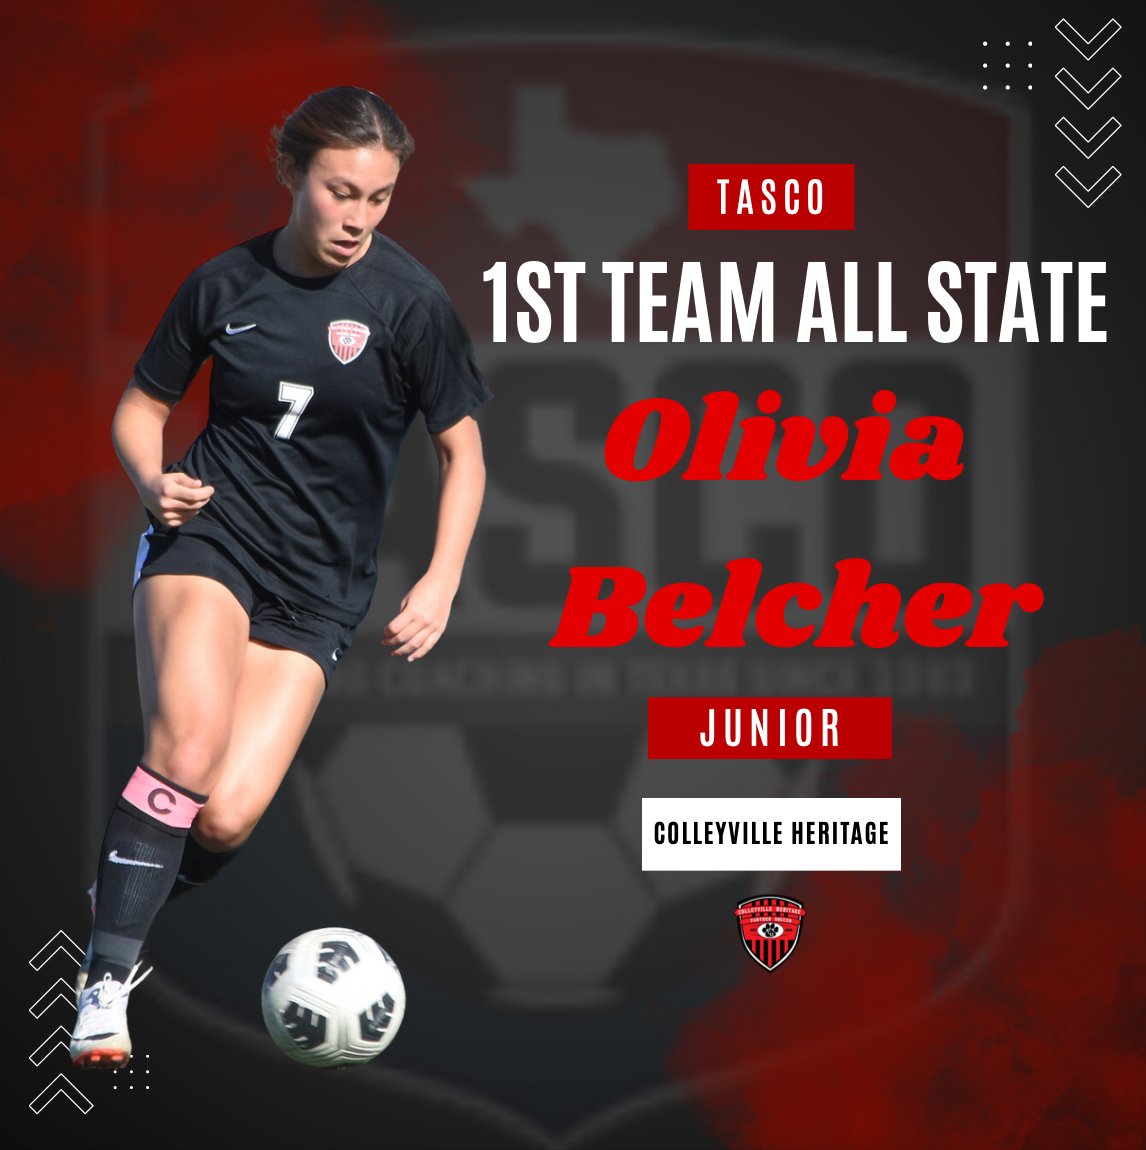 Big Congrats to Olivia Belcher on being named TASCO 1st Team All State! #PFND